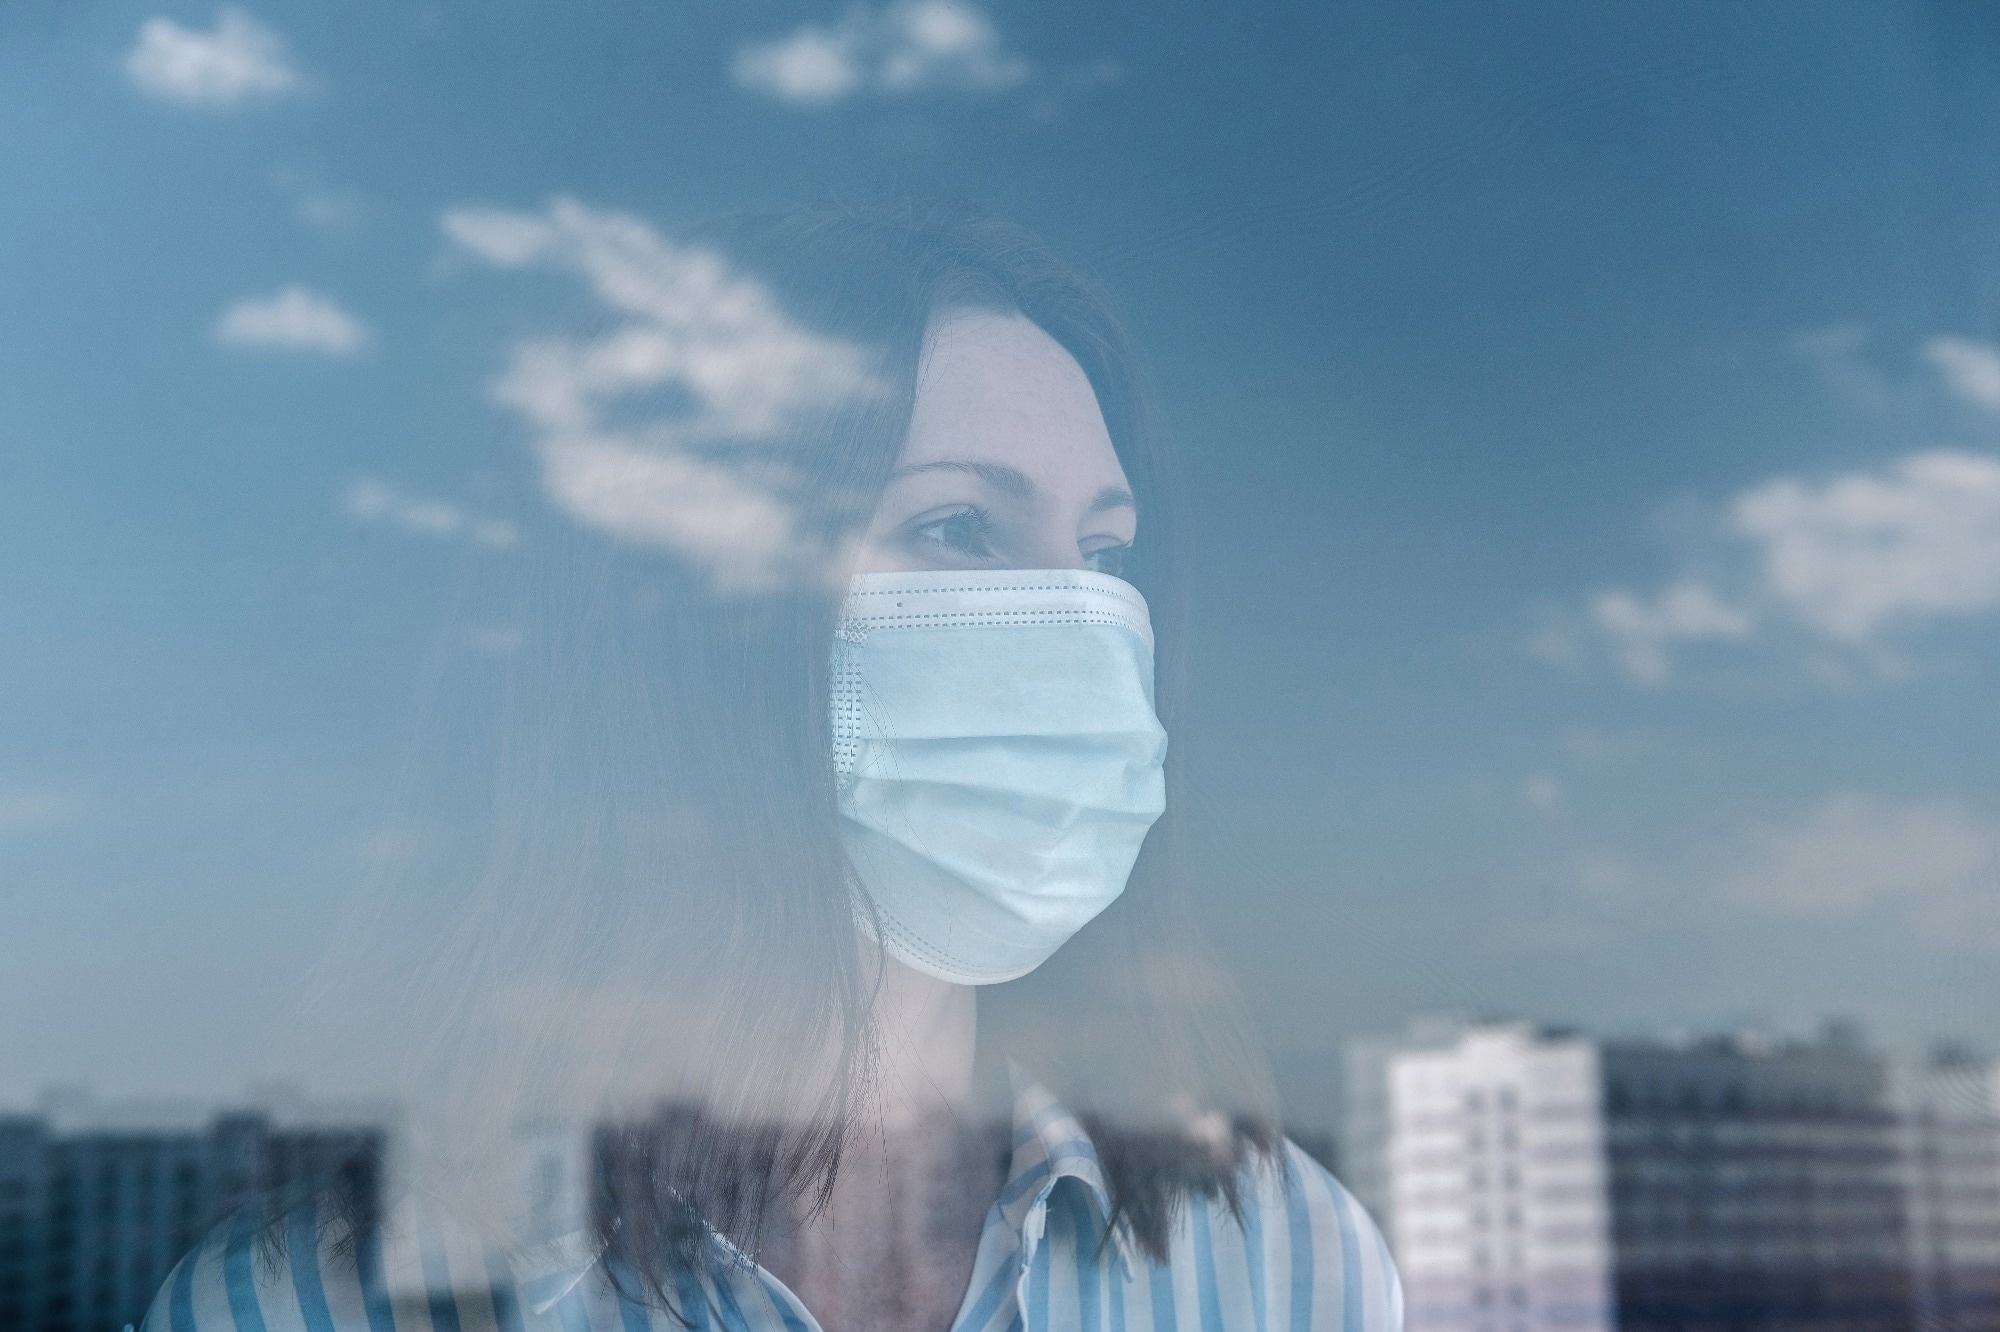 Has the COVID-19 pandemic widening the mental health gap in the UK?